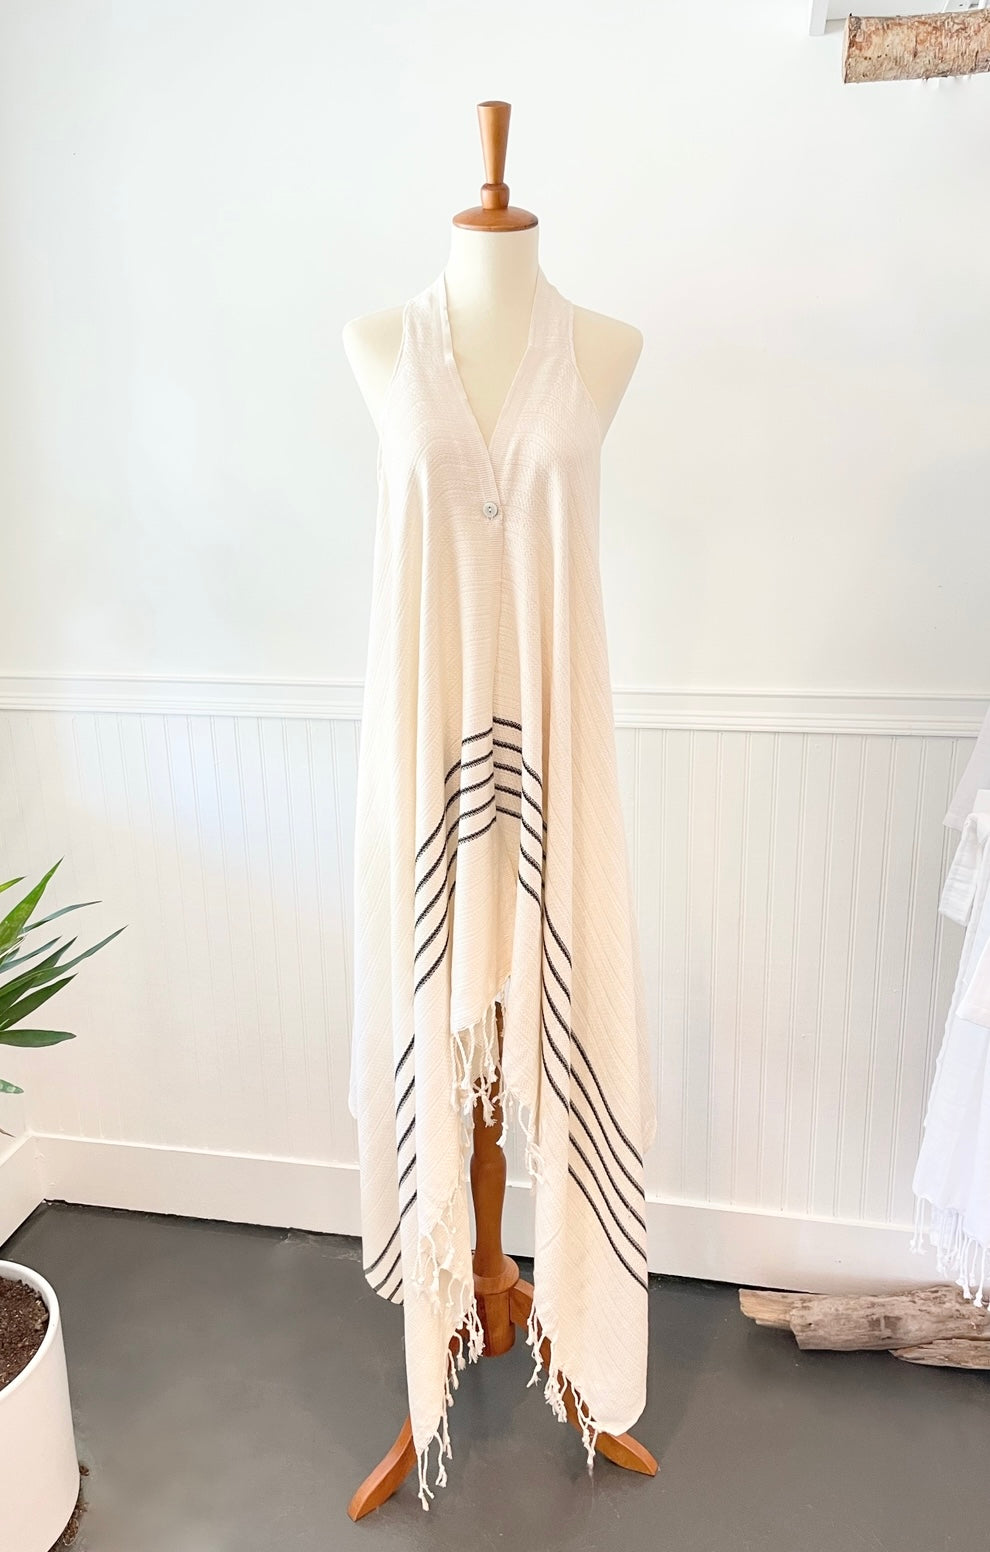 This chic boho style cover-up is hand loomed with 50% bamboo and 50% natural Turkish cotton.  So soft and cute for any summer occasion.  Wear it to the beach, pool, or as an extra layer to your summer outfits!  Cream and black.  One size.  Fair trade.